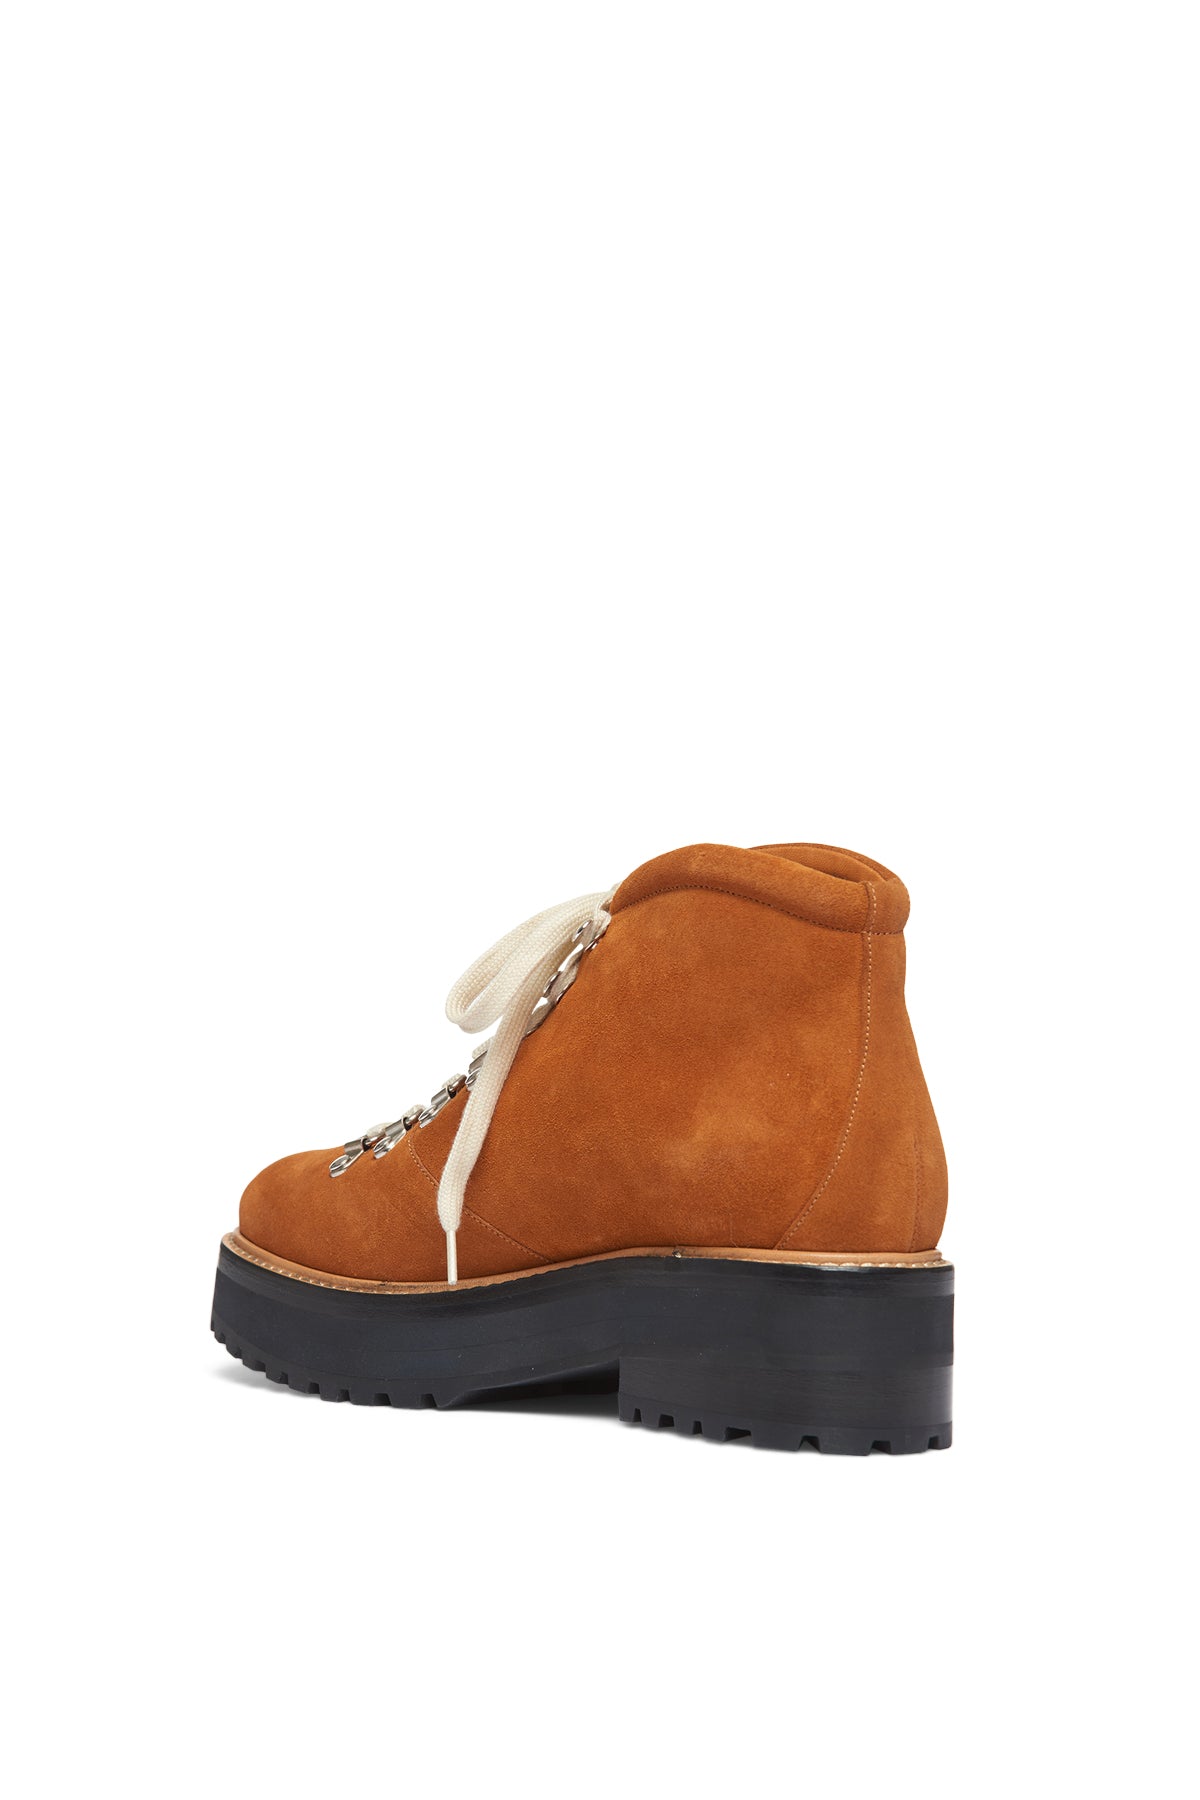 Kash Boot in Cashew Shearling & Leather